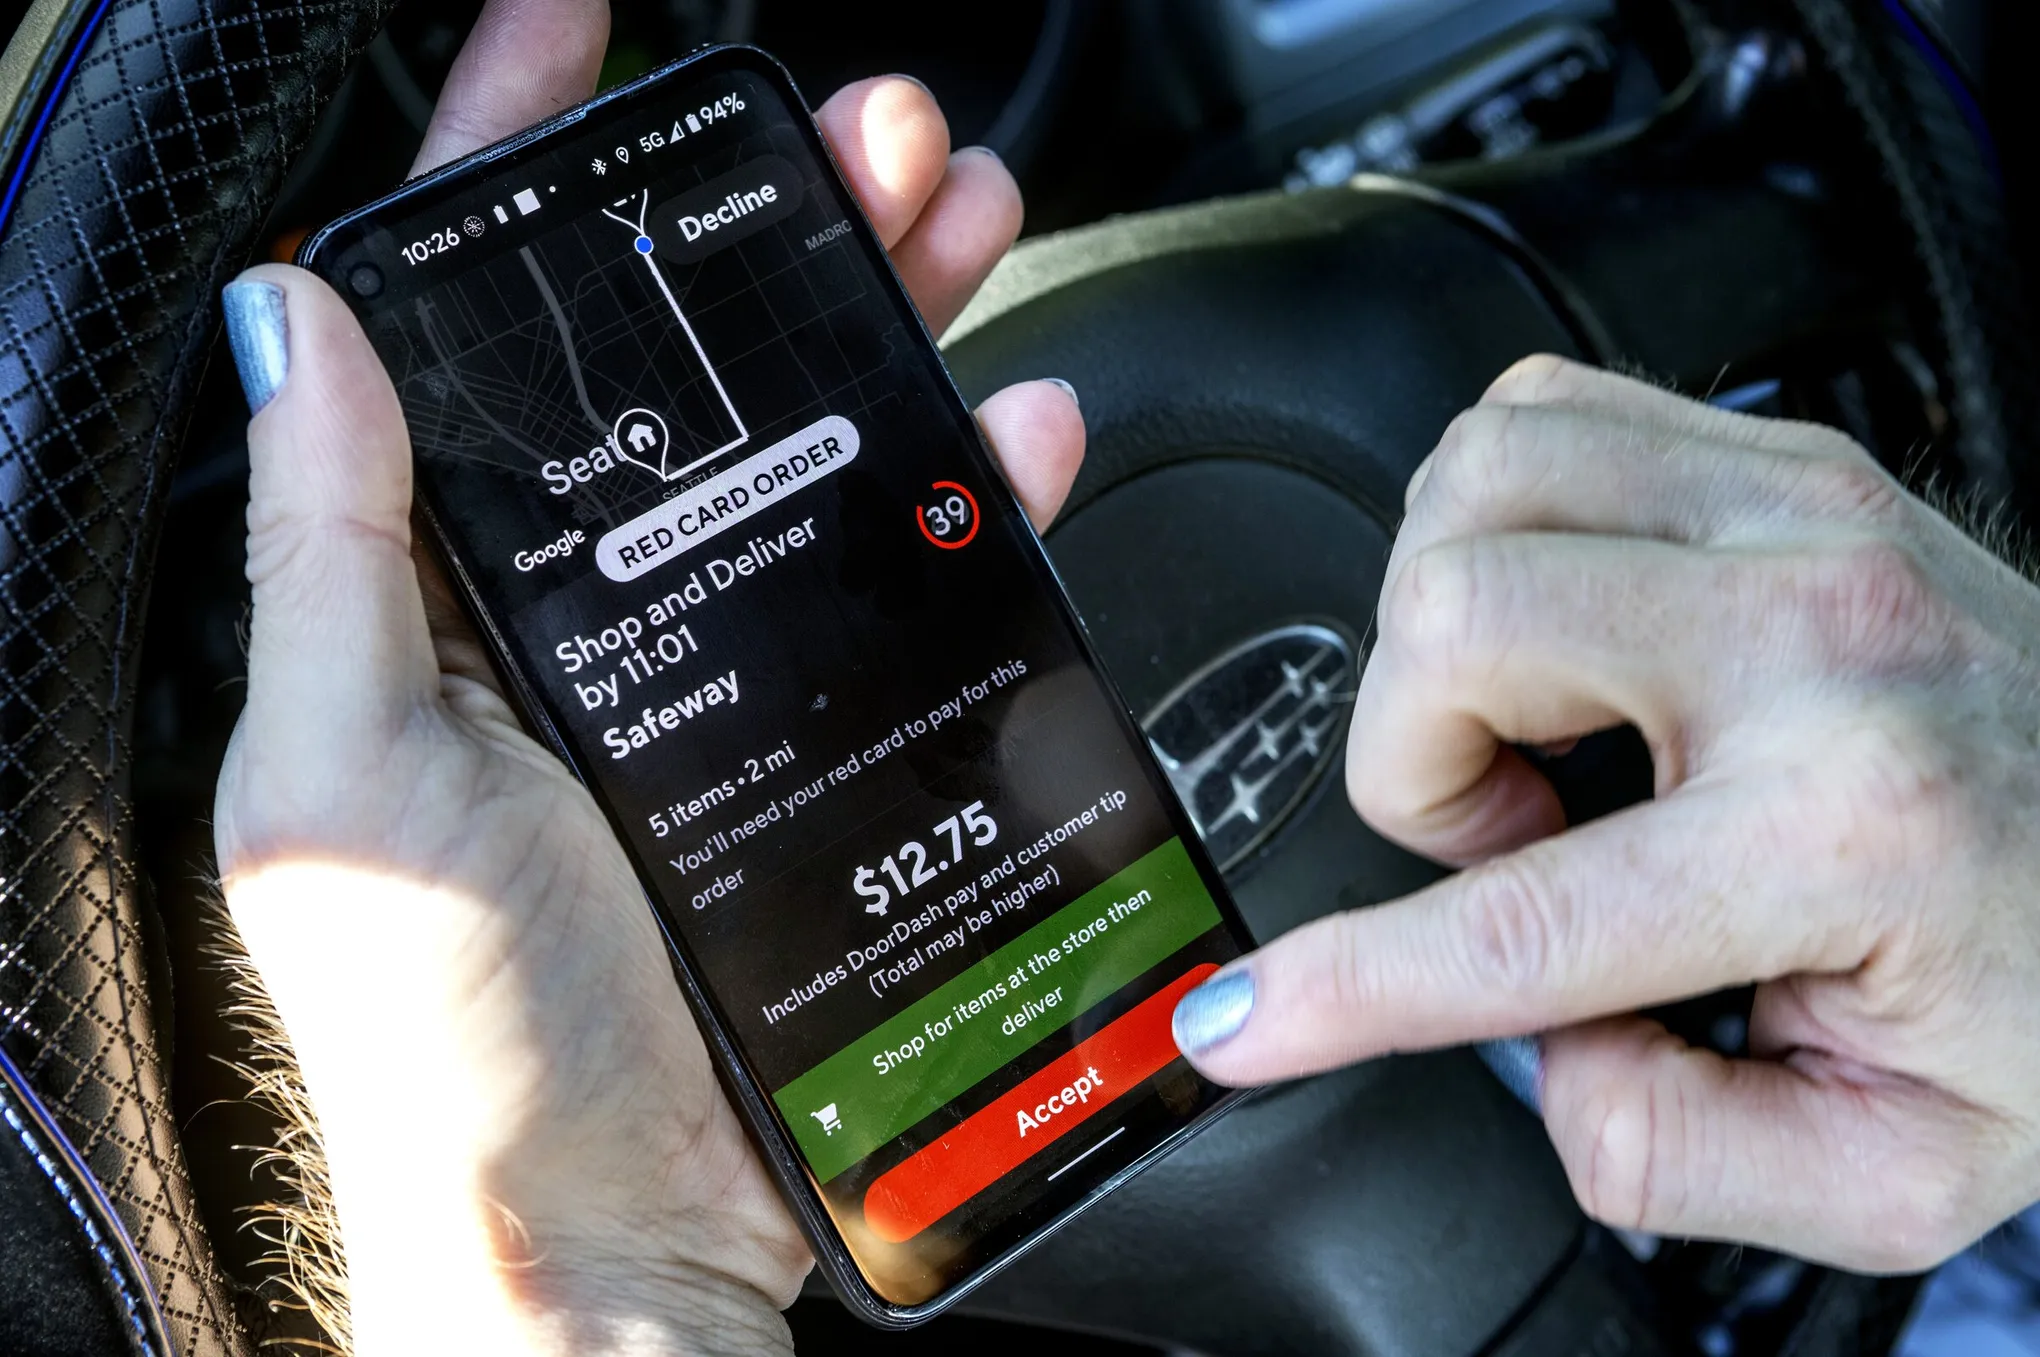 Seattle Resident Takes on Uber and DoorDash Over Hidden $5 Fees, Files FTC Complaint